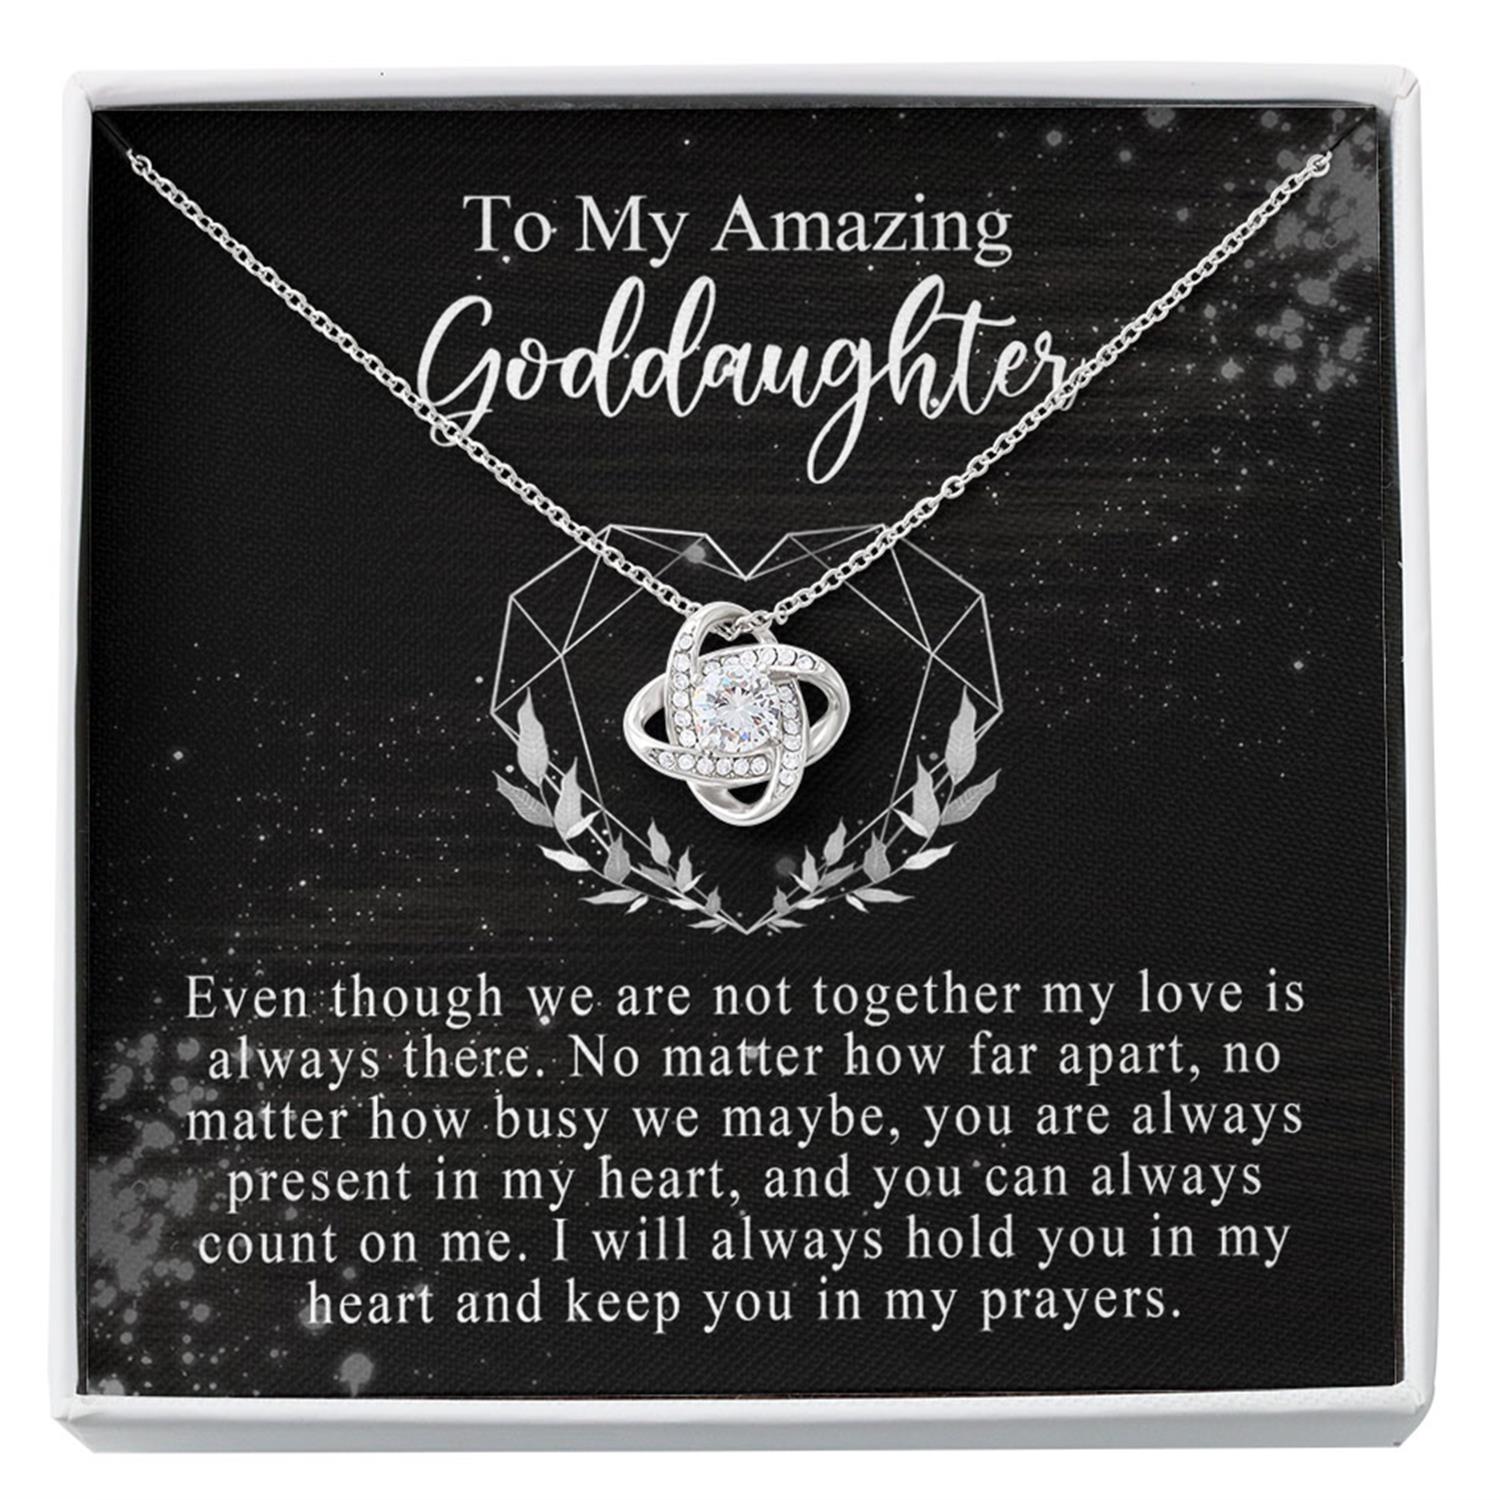 Goddaughter Necklace, To My Goddaughter Gift From Godmother Necklace Gift For Baptism, Confirmation, Graduation Custom Necklace